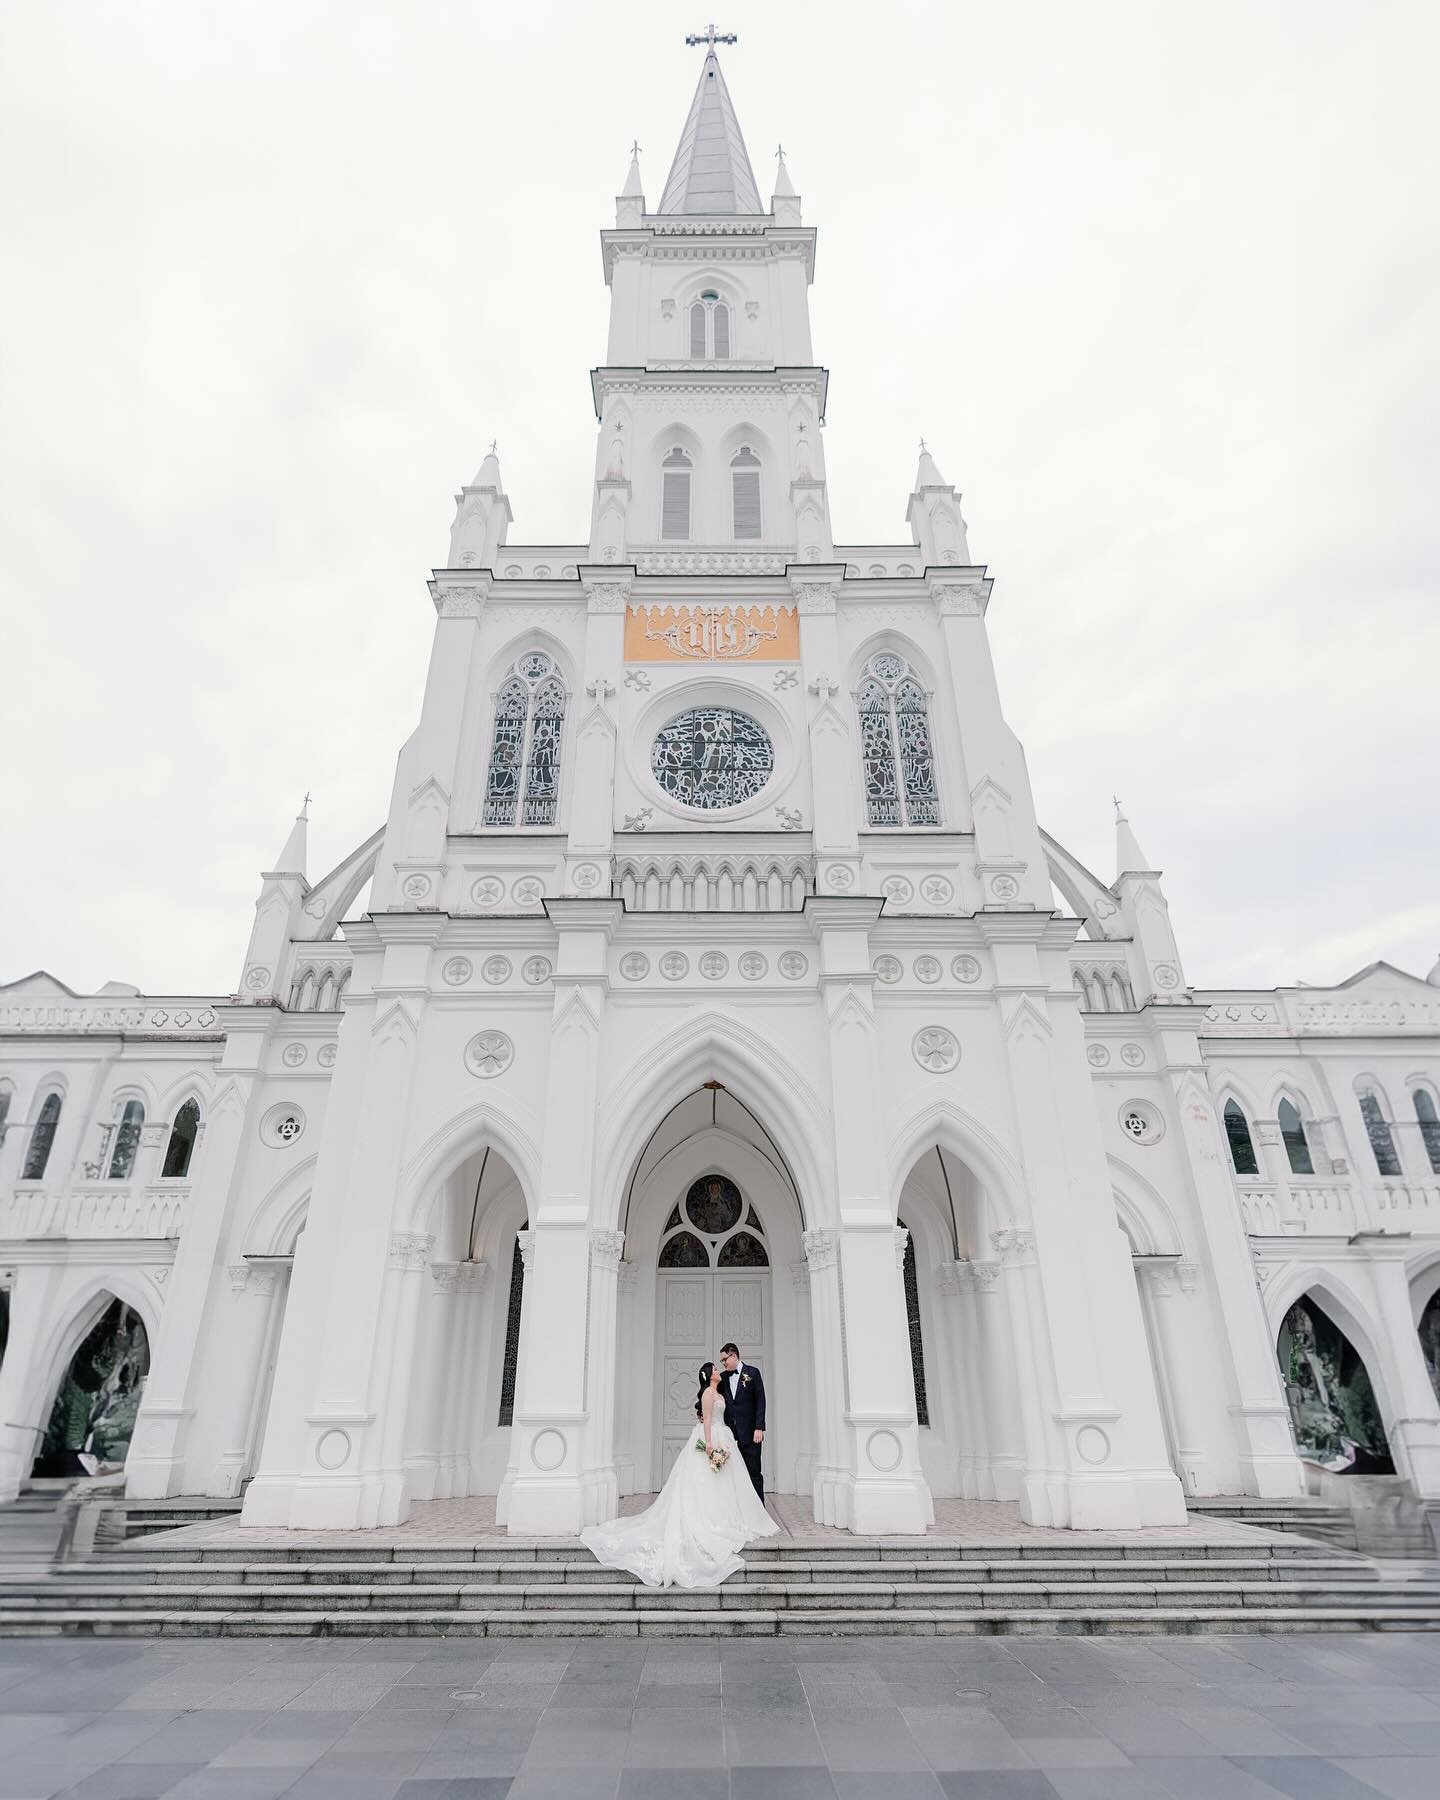 Cherie Ann &amp; Nicholas flew in to Singapore for a intimate wedding party with their closest families and friends. Before dinner, we took some photos for them, showcasing the grandeur and charm of @chijmes.sg ⛪️ 
-
Photo @antelopestudios 
Makeup @e